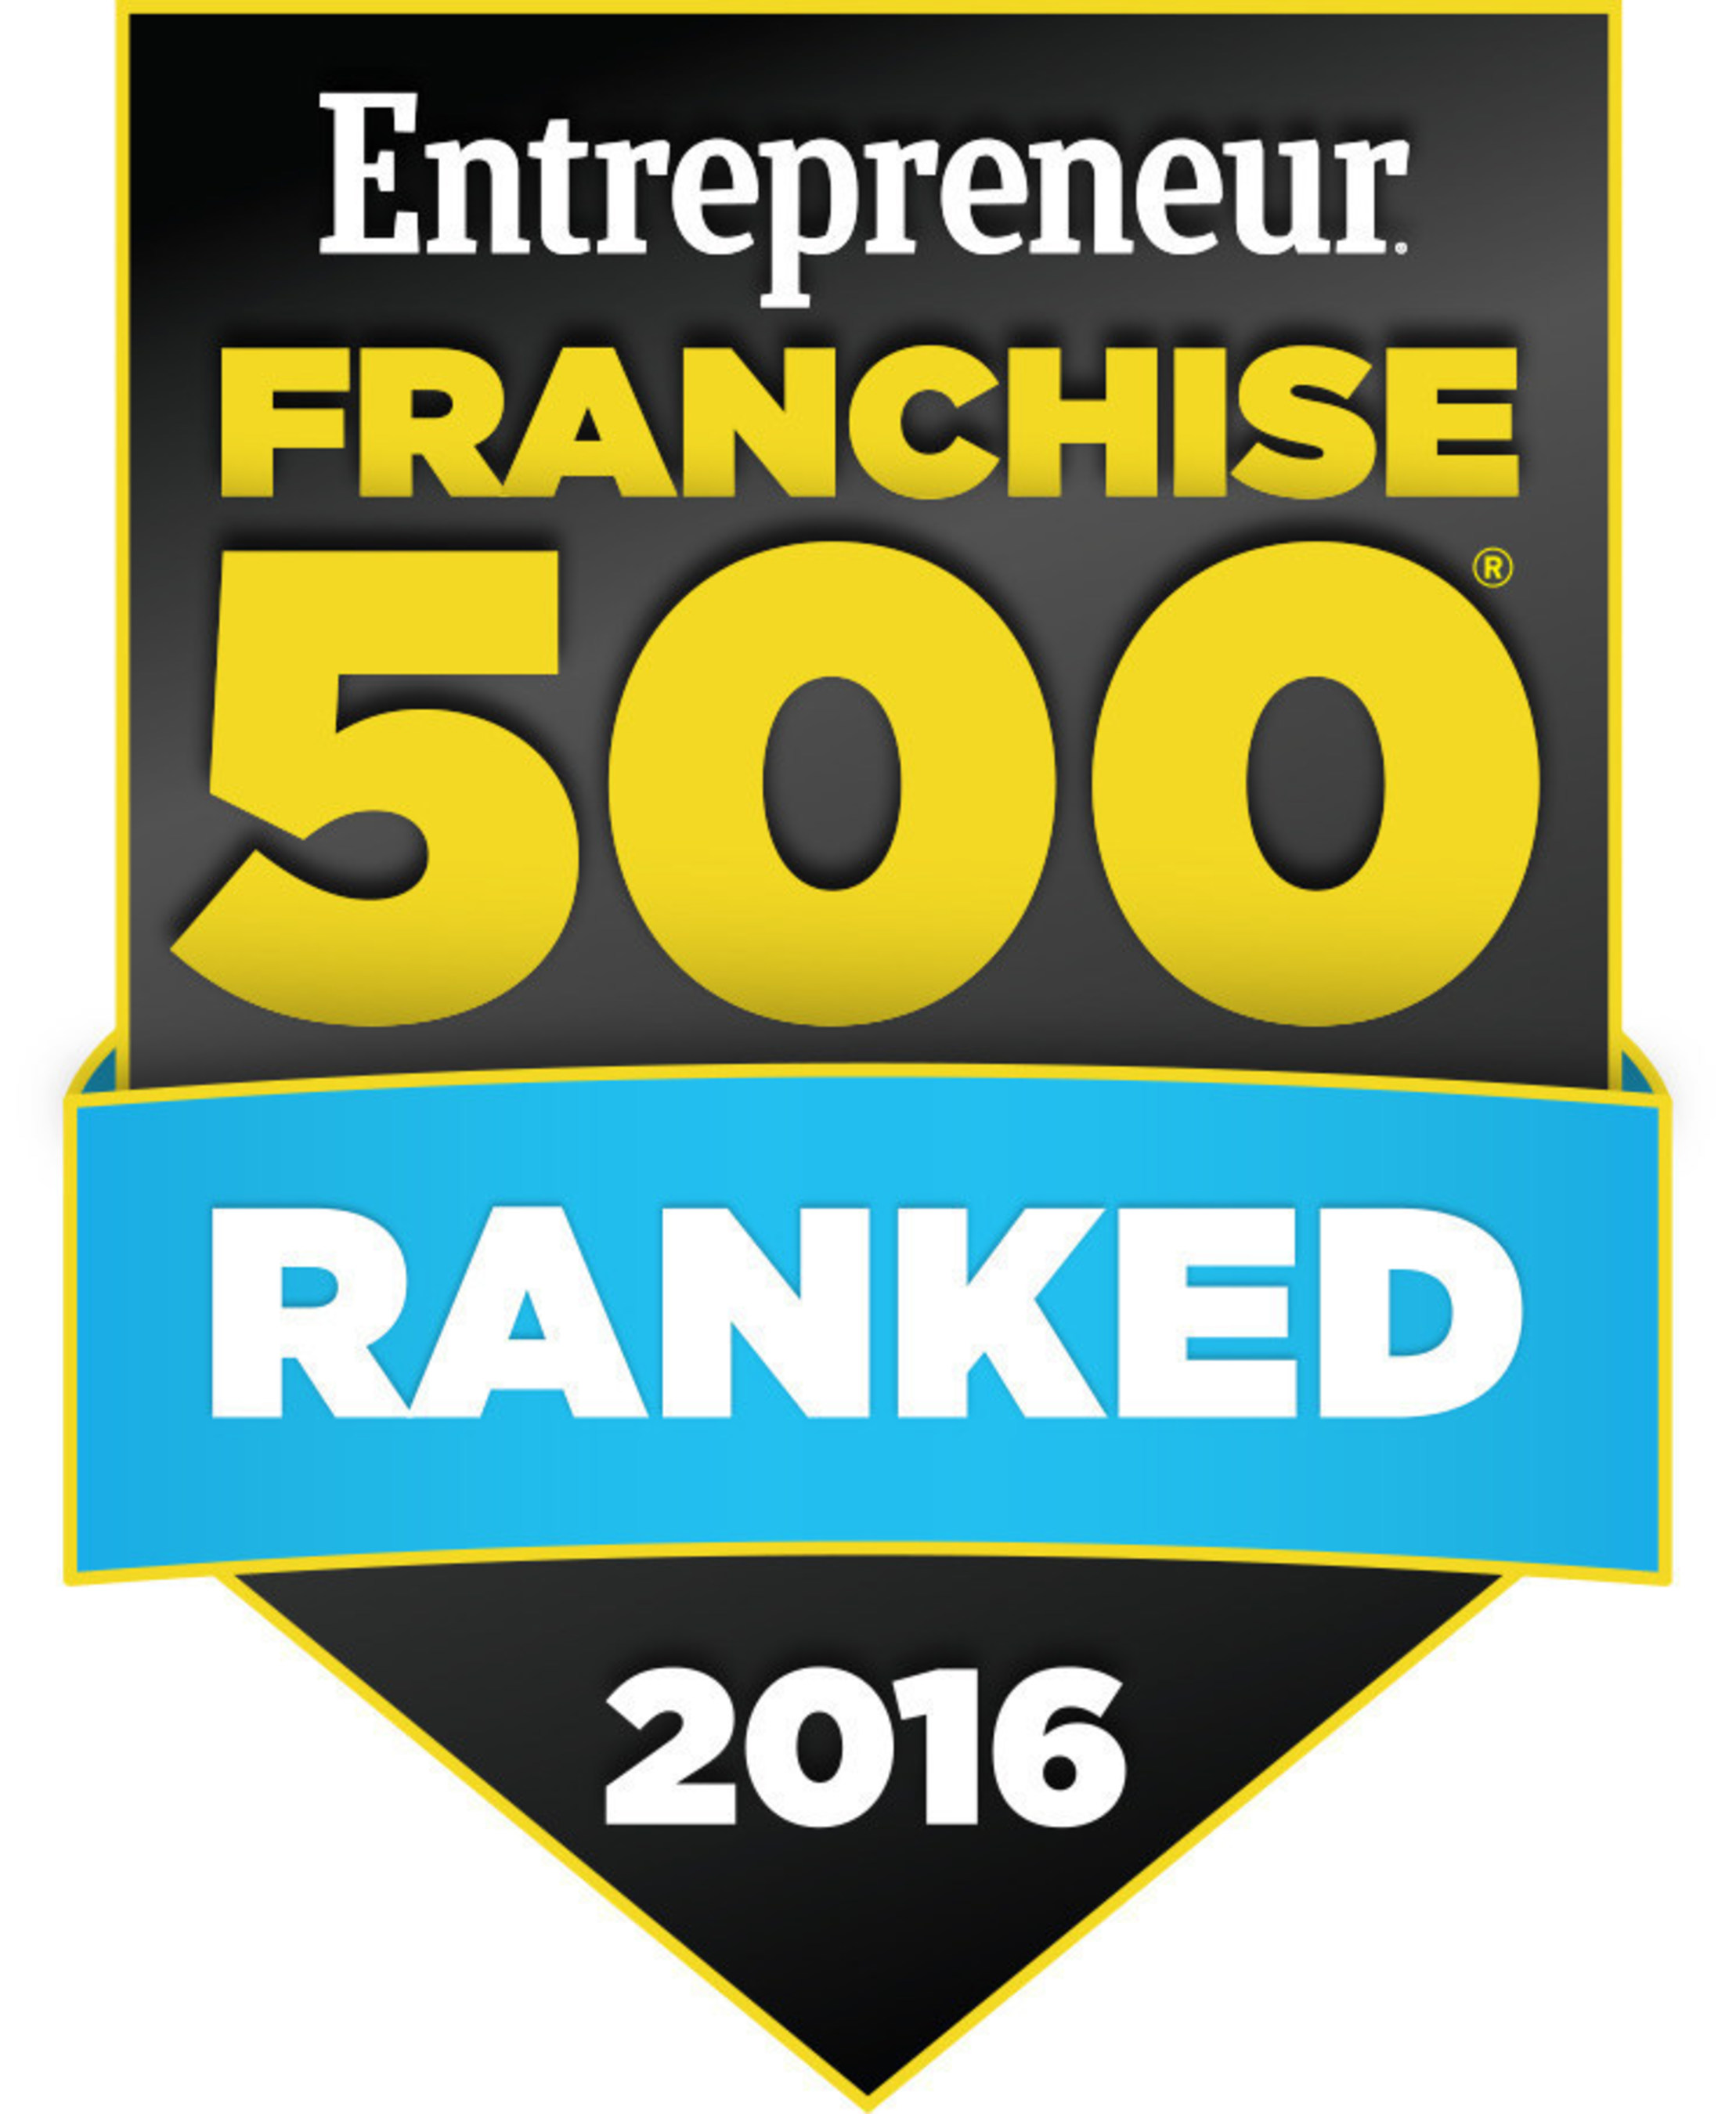 The Entrepreneur Magazine 2016 Franchise 500's 37th Annual Franchise 500 ranking reveals the impact of the newest trends and the industries poised for growth.